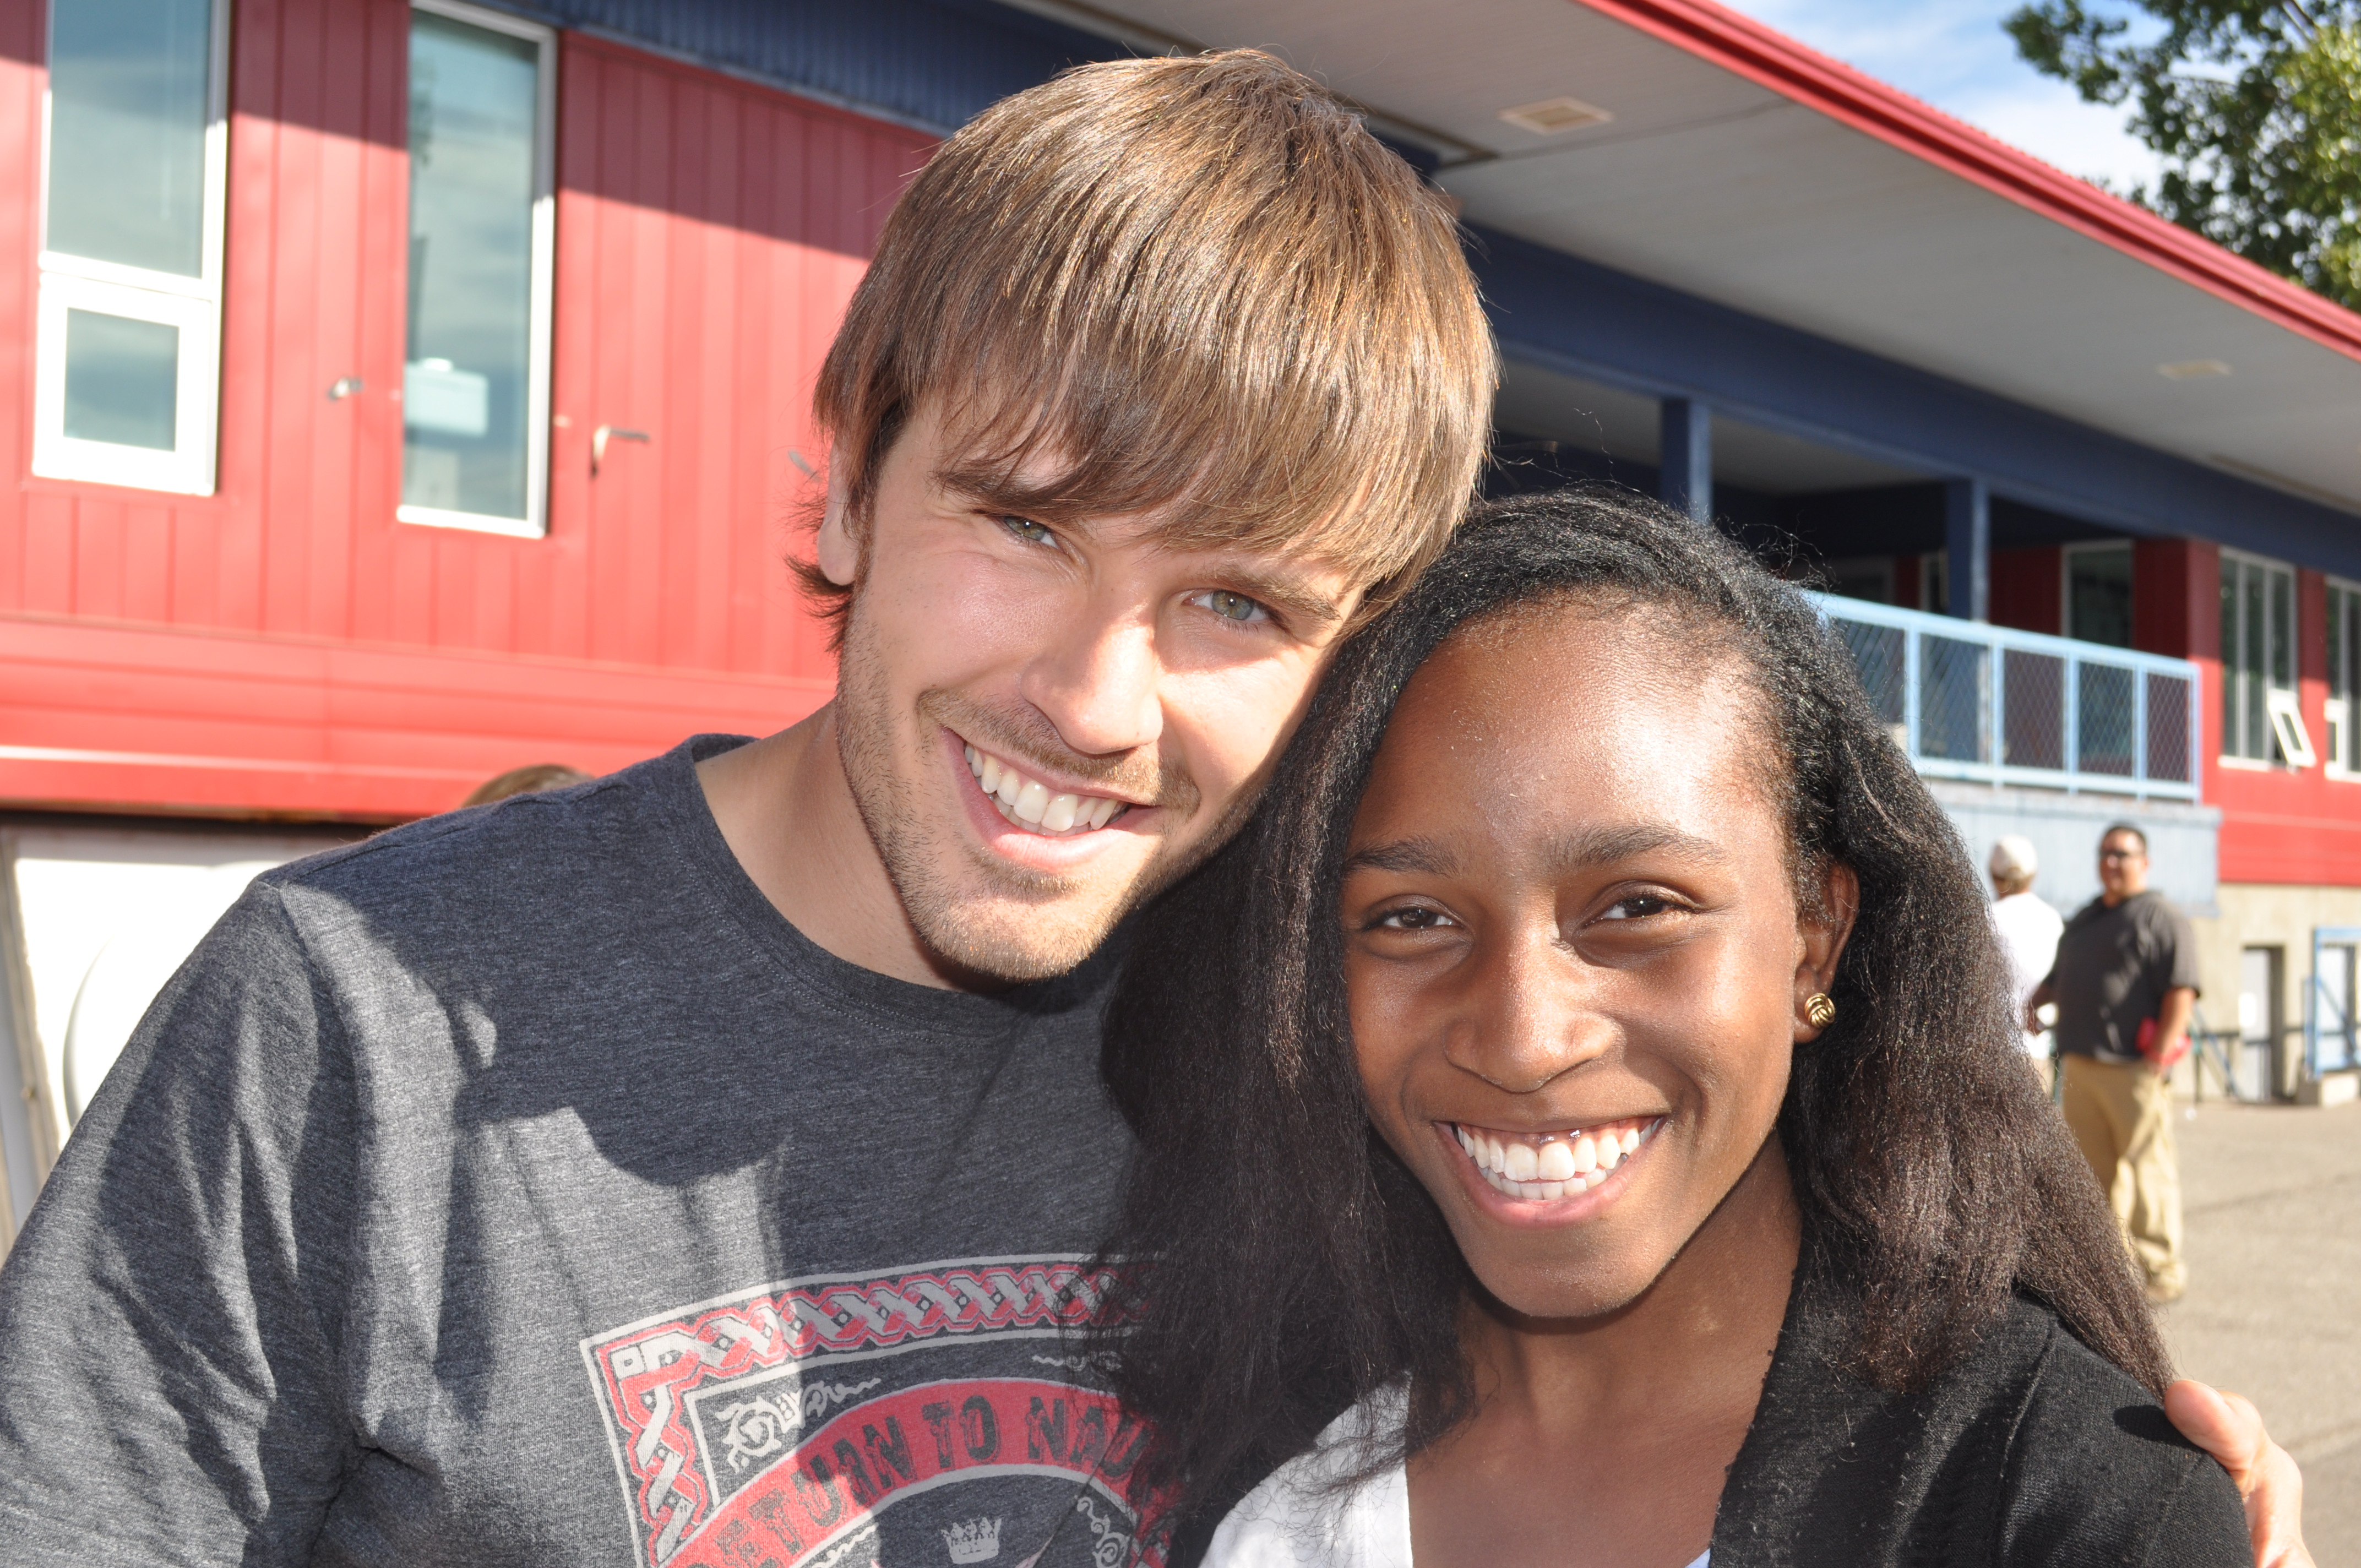 Favour with Graham Wardle from Heartland